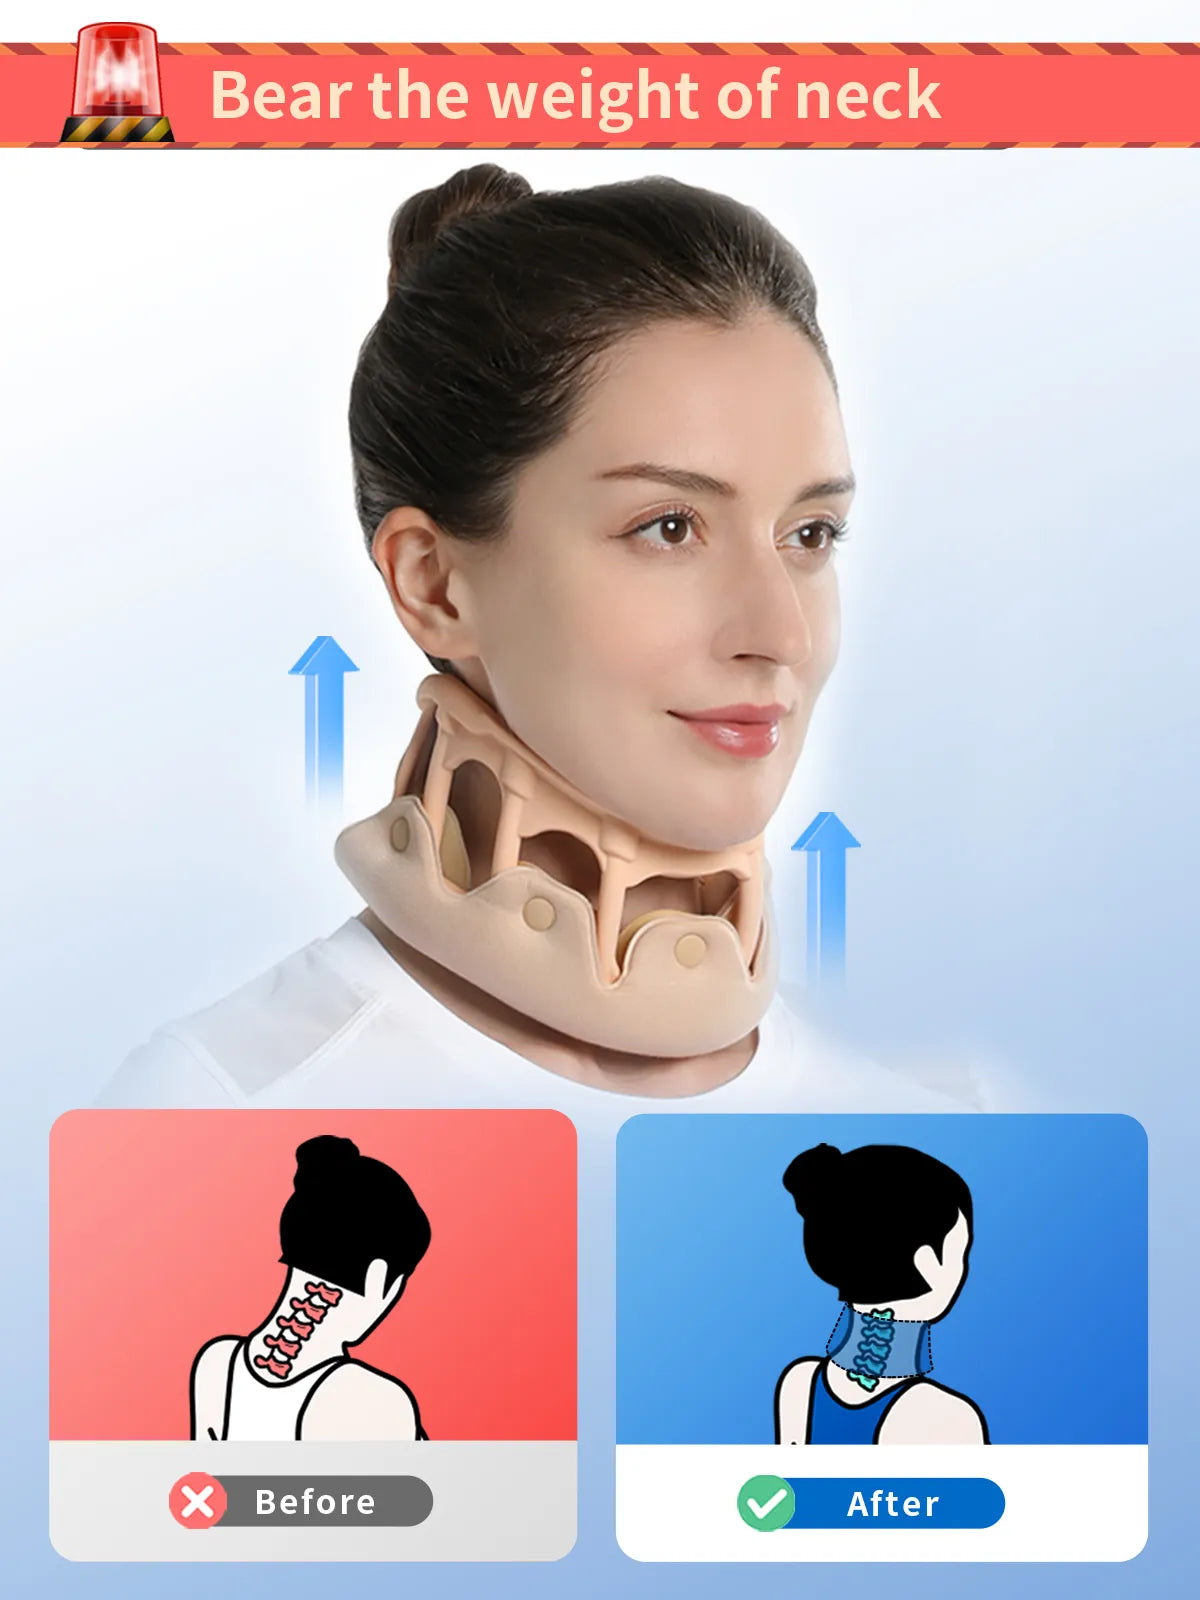 VELPEAU Silicone Collar Neck Support